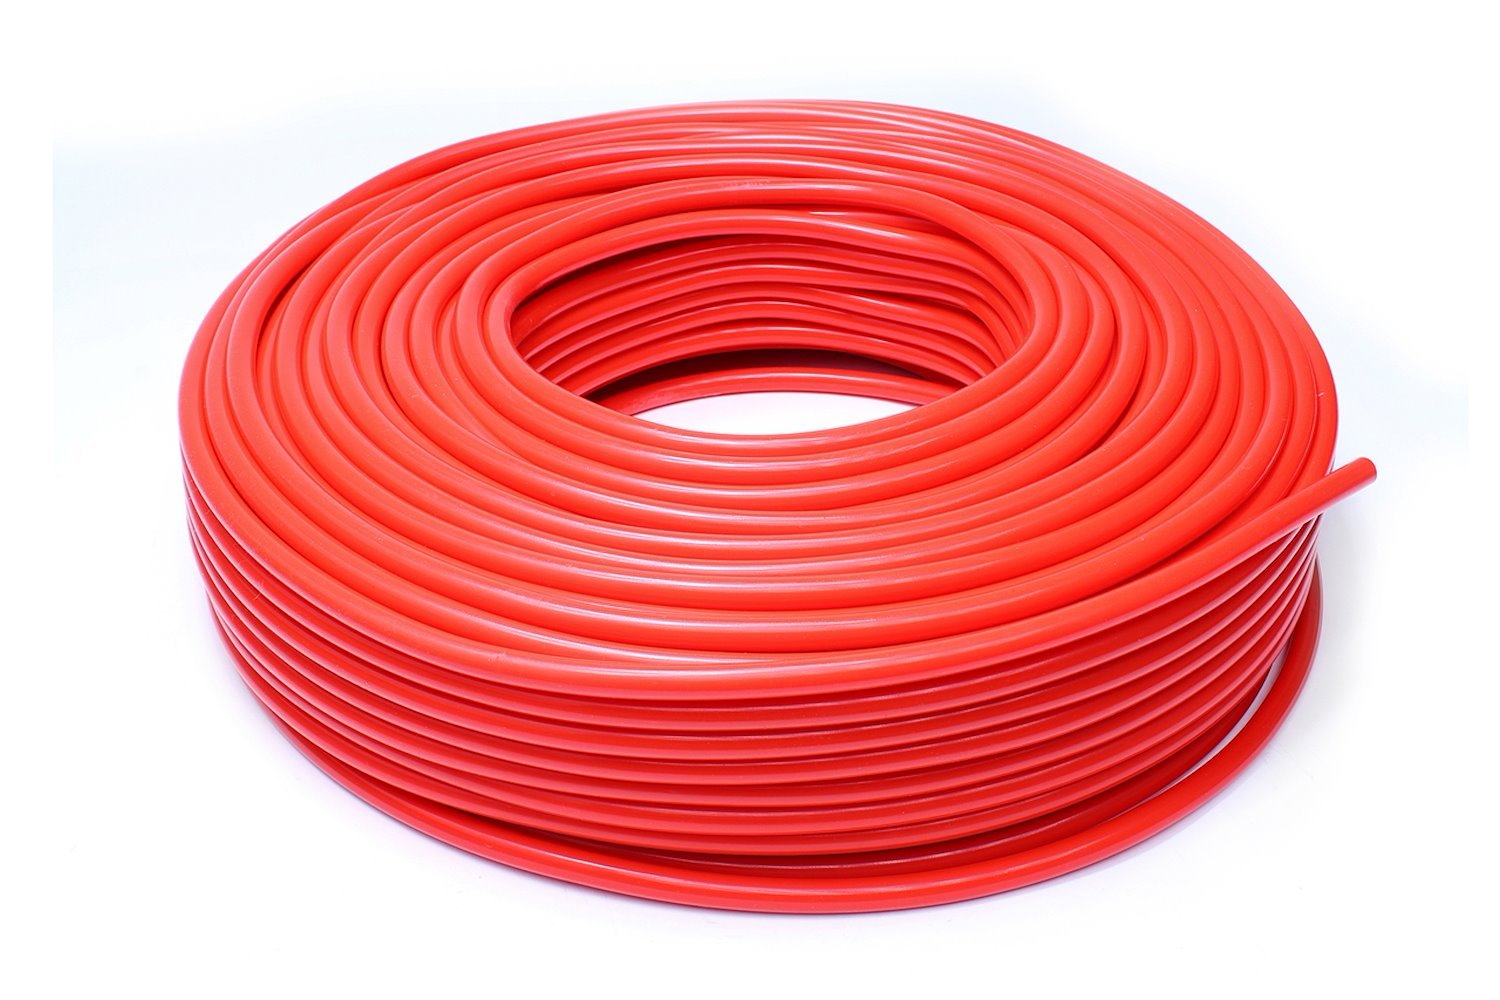 HTSVH6-REDx100 High-Temperature Silicone Vacuum Hose Tubing, 1/4 in. ID, 100 ft. Roll, Red